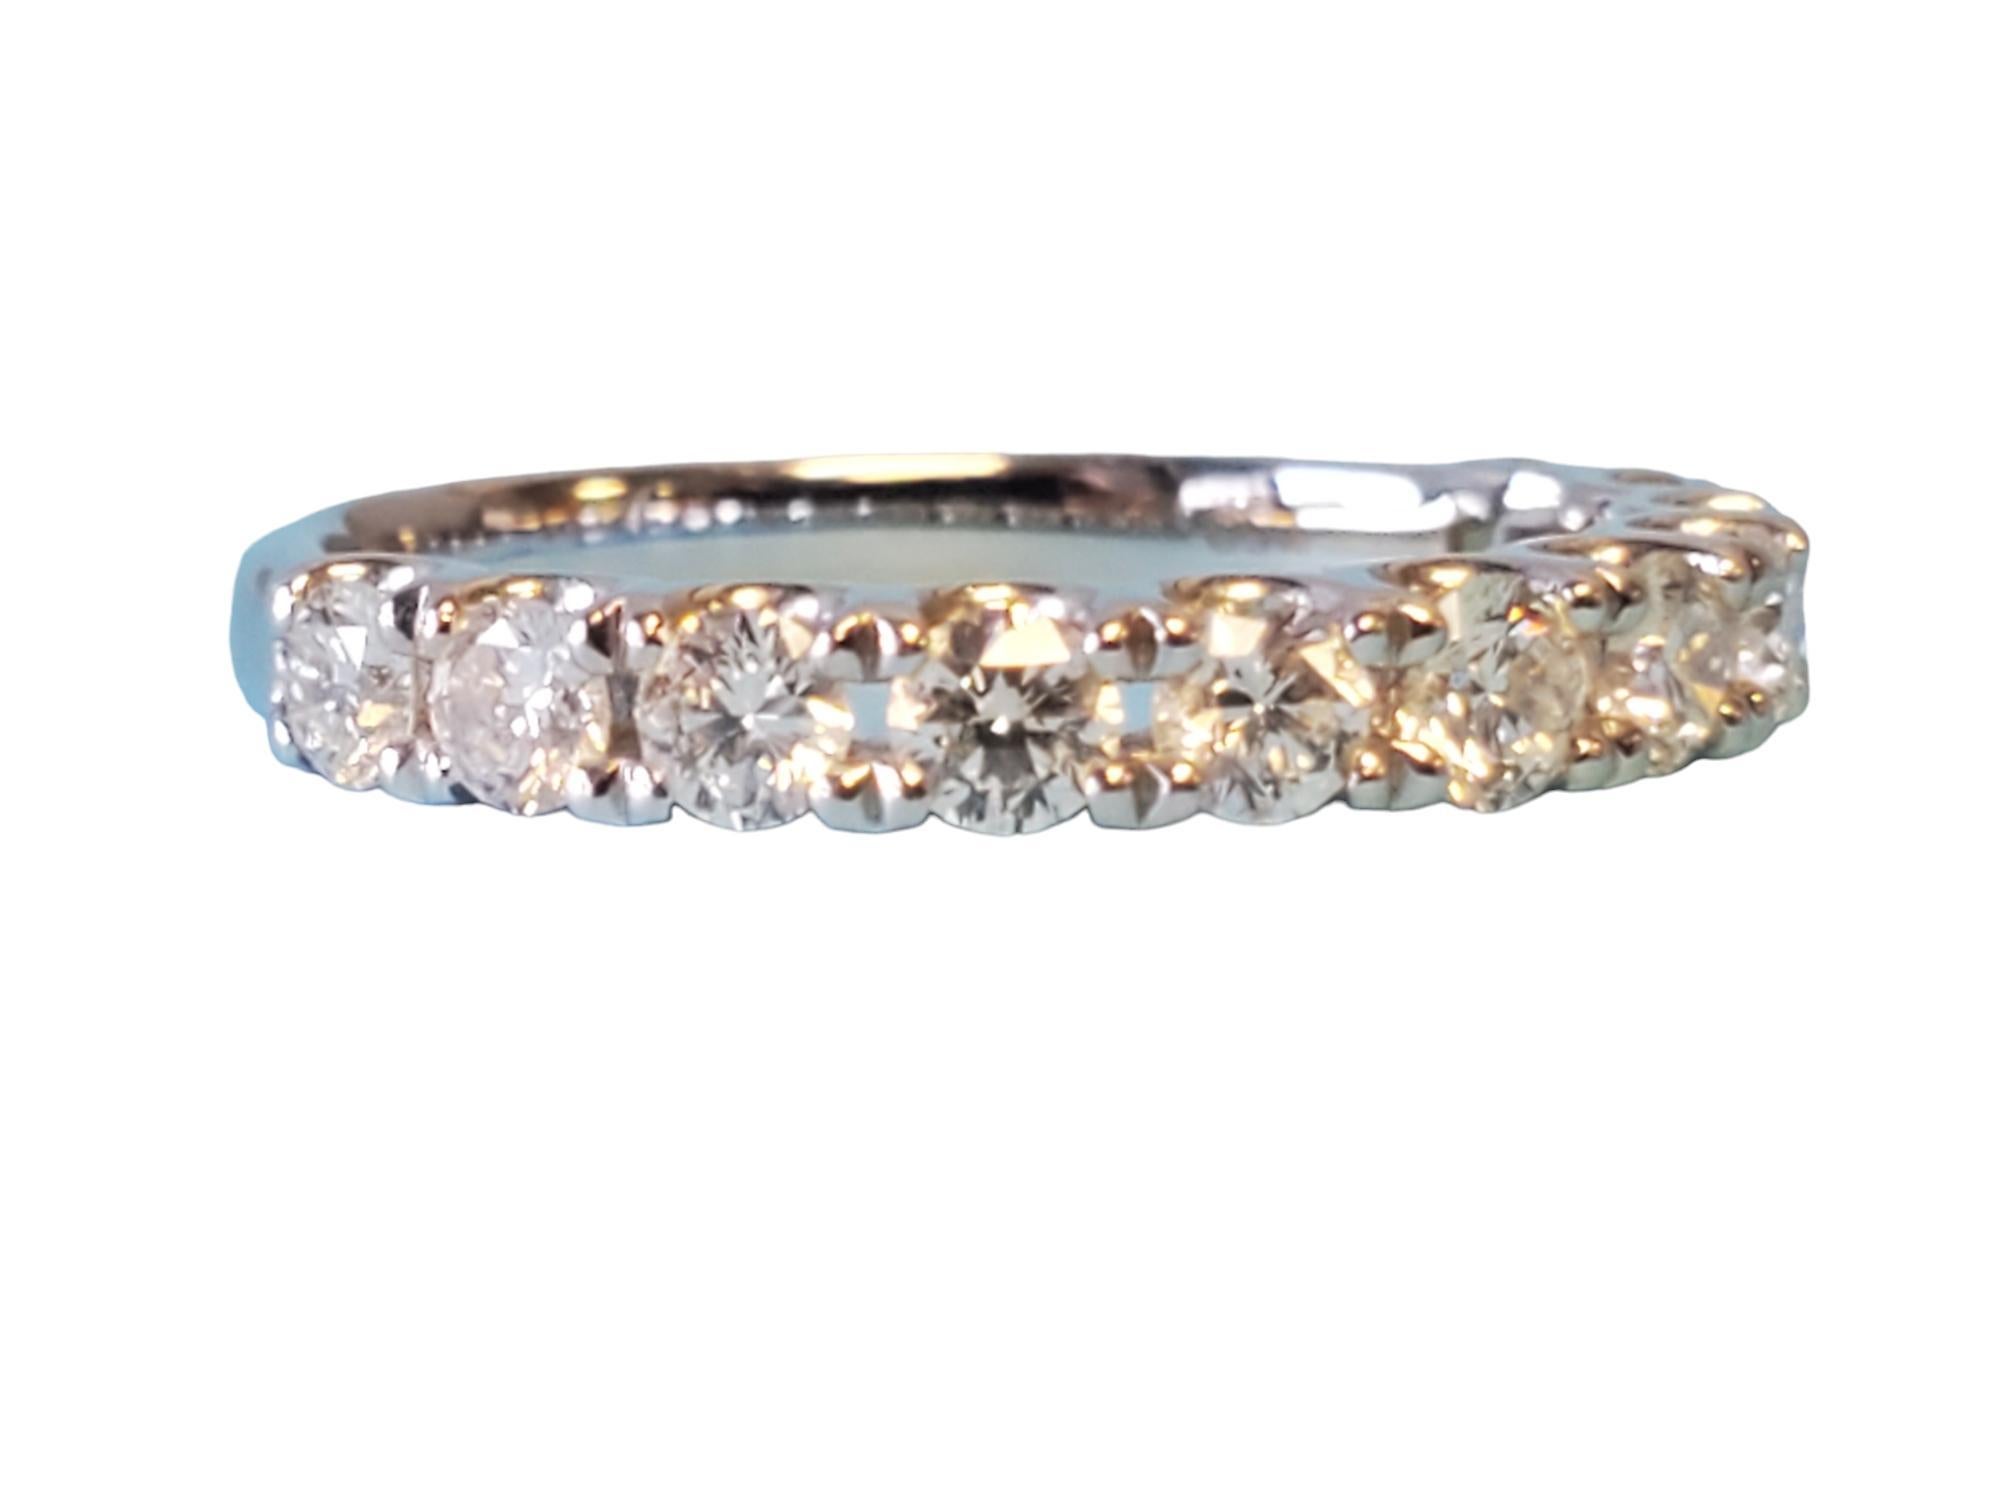 18k White gold half eternity band - closeout piece. Unworn, gorgeous half eternity band. This band features 1.00tcw white vs diamonds that exhibit fire and scintillation. The size is 6.75, ready to wear.